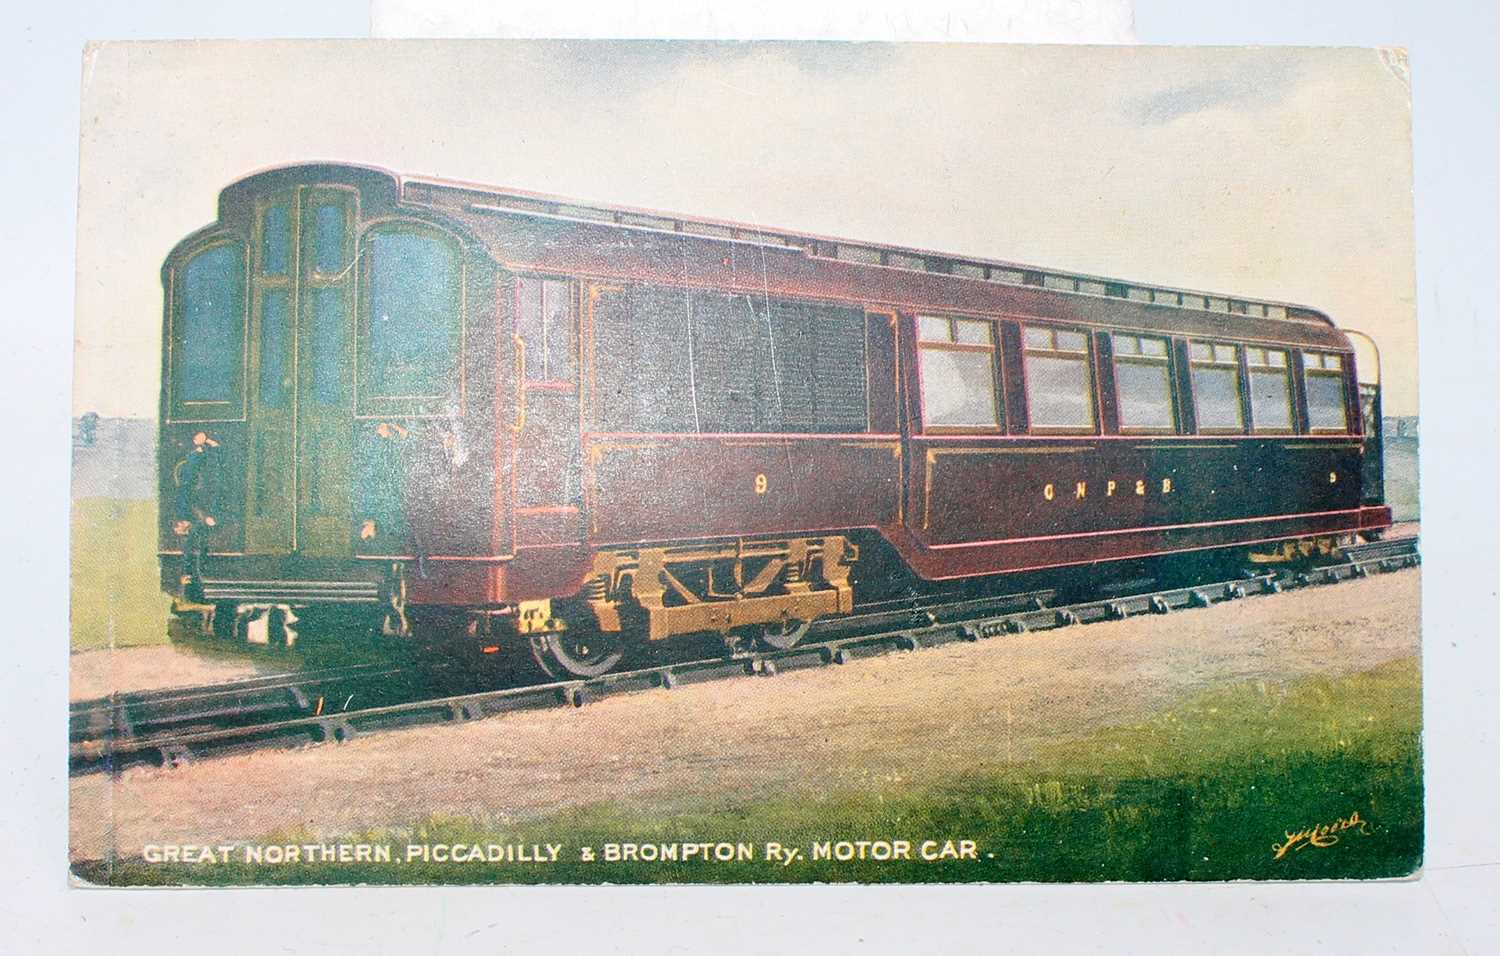 An original Great Northern Piccadilly and Brompton railway postcard depicting the GNP&B motorcar No.